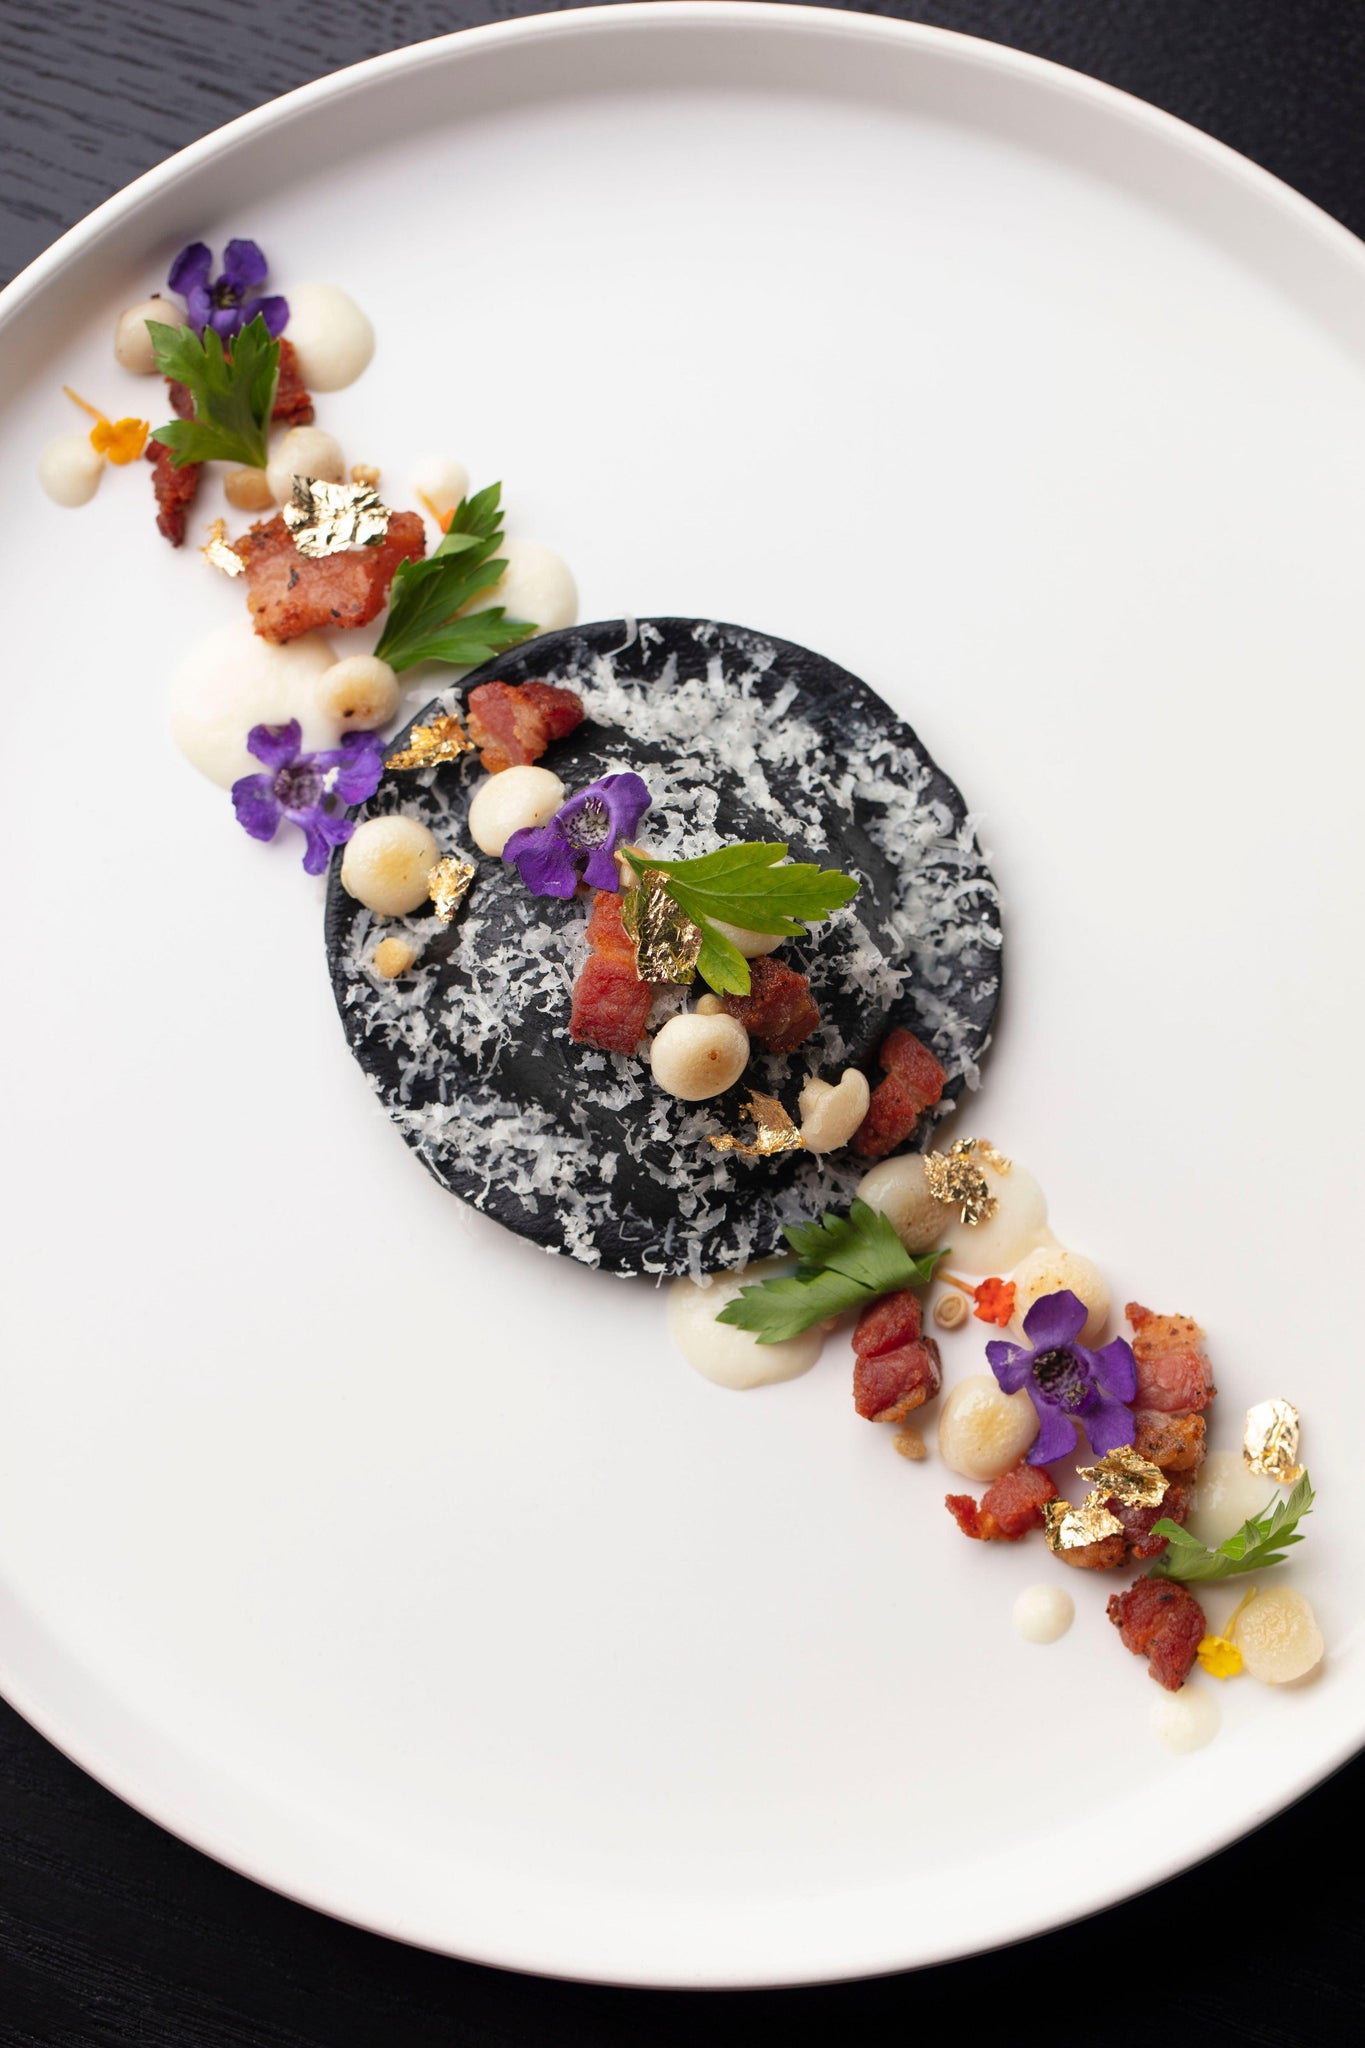 Garden Harvest Tasting Menu by Chef Jaclyn ($215 per guest) - Cheferbly